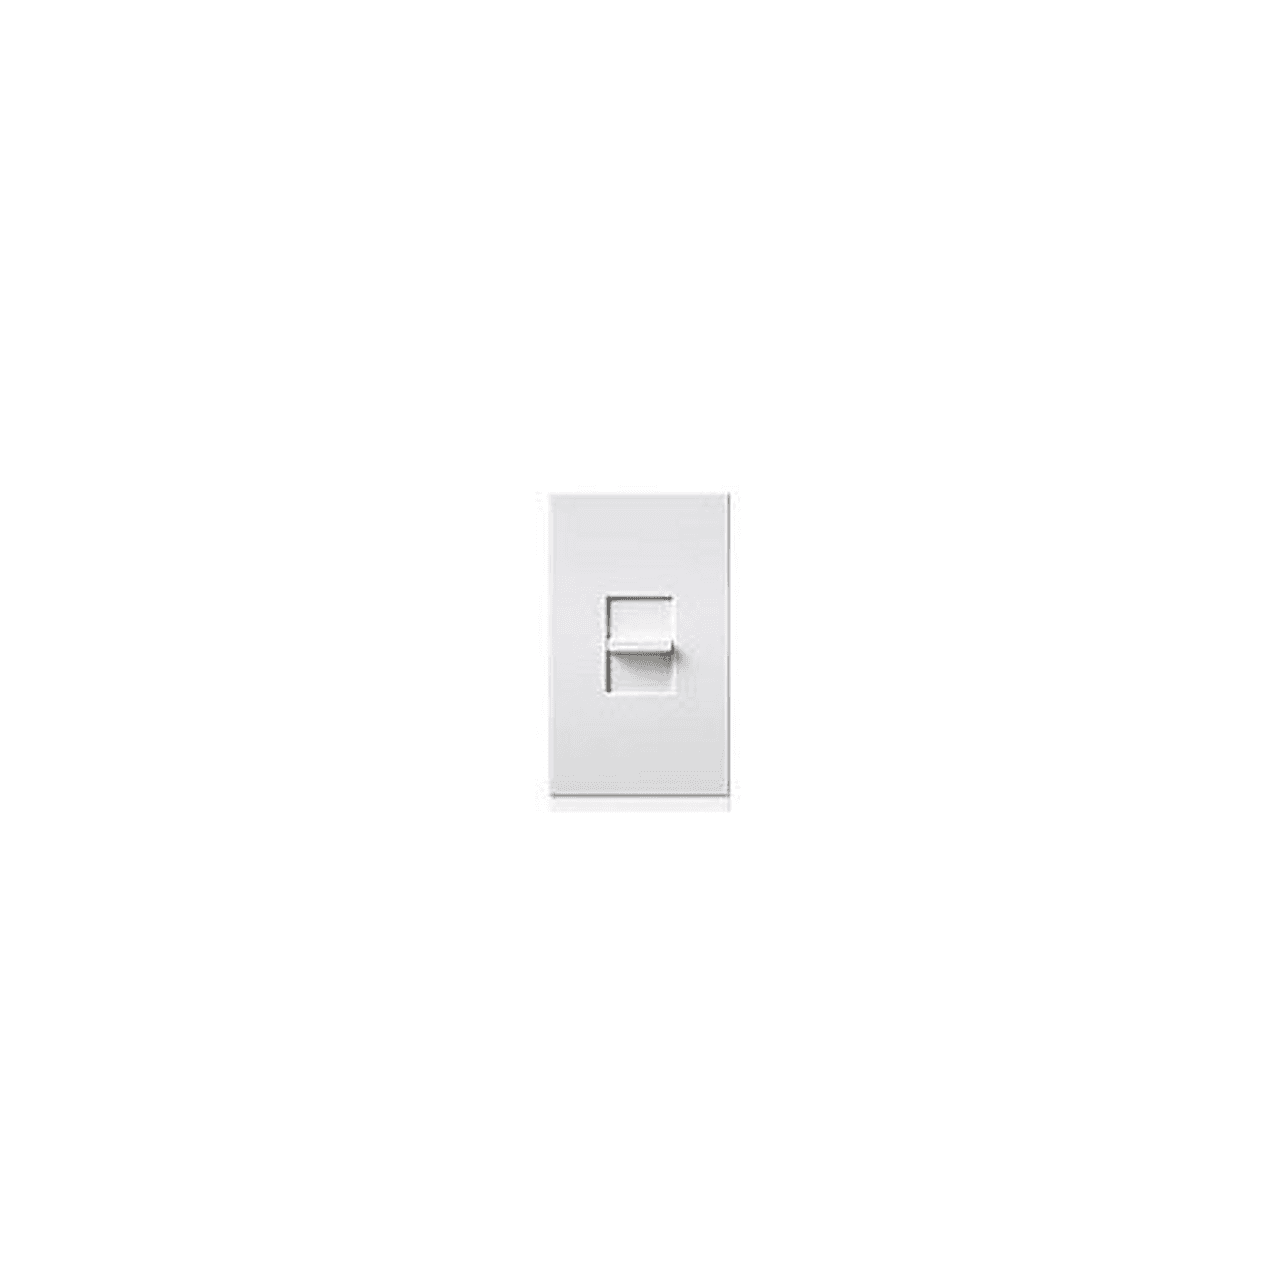 Lutron NTF-10-277-IV Lutron NTF-10-277-IV Light and Dimmer Switches EA